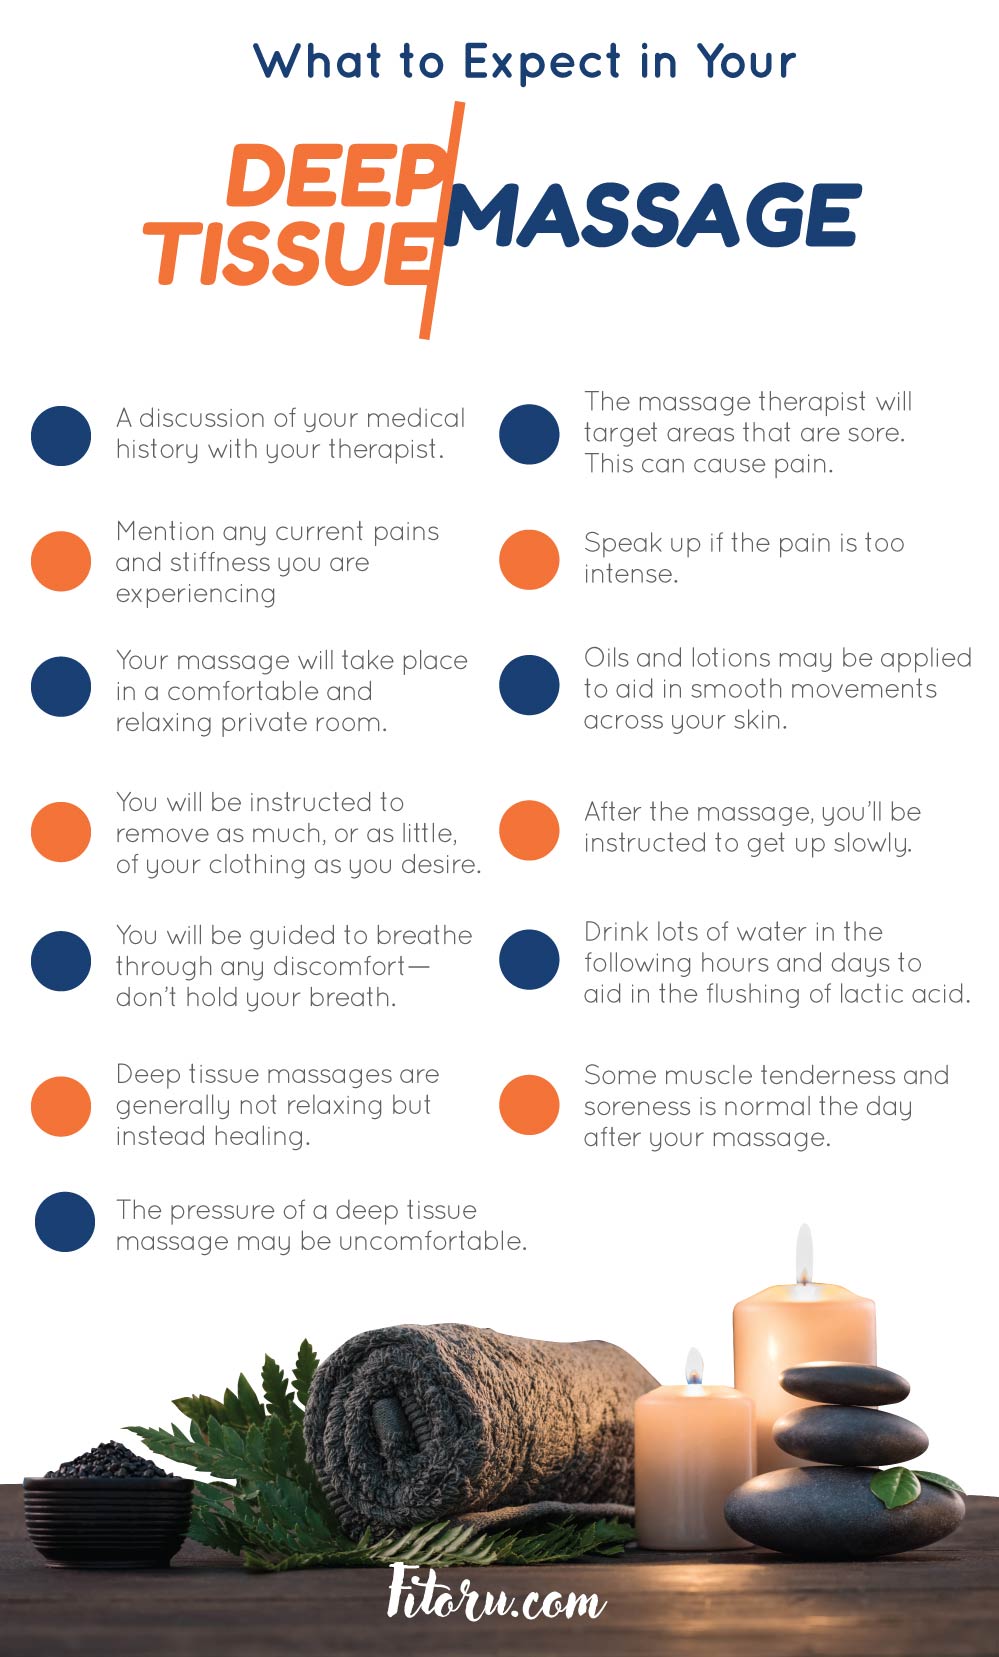 Here is what you can expect during a deep tissue massage.